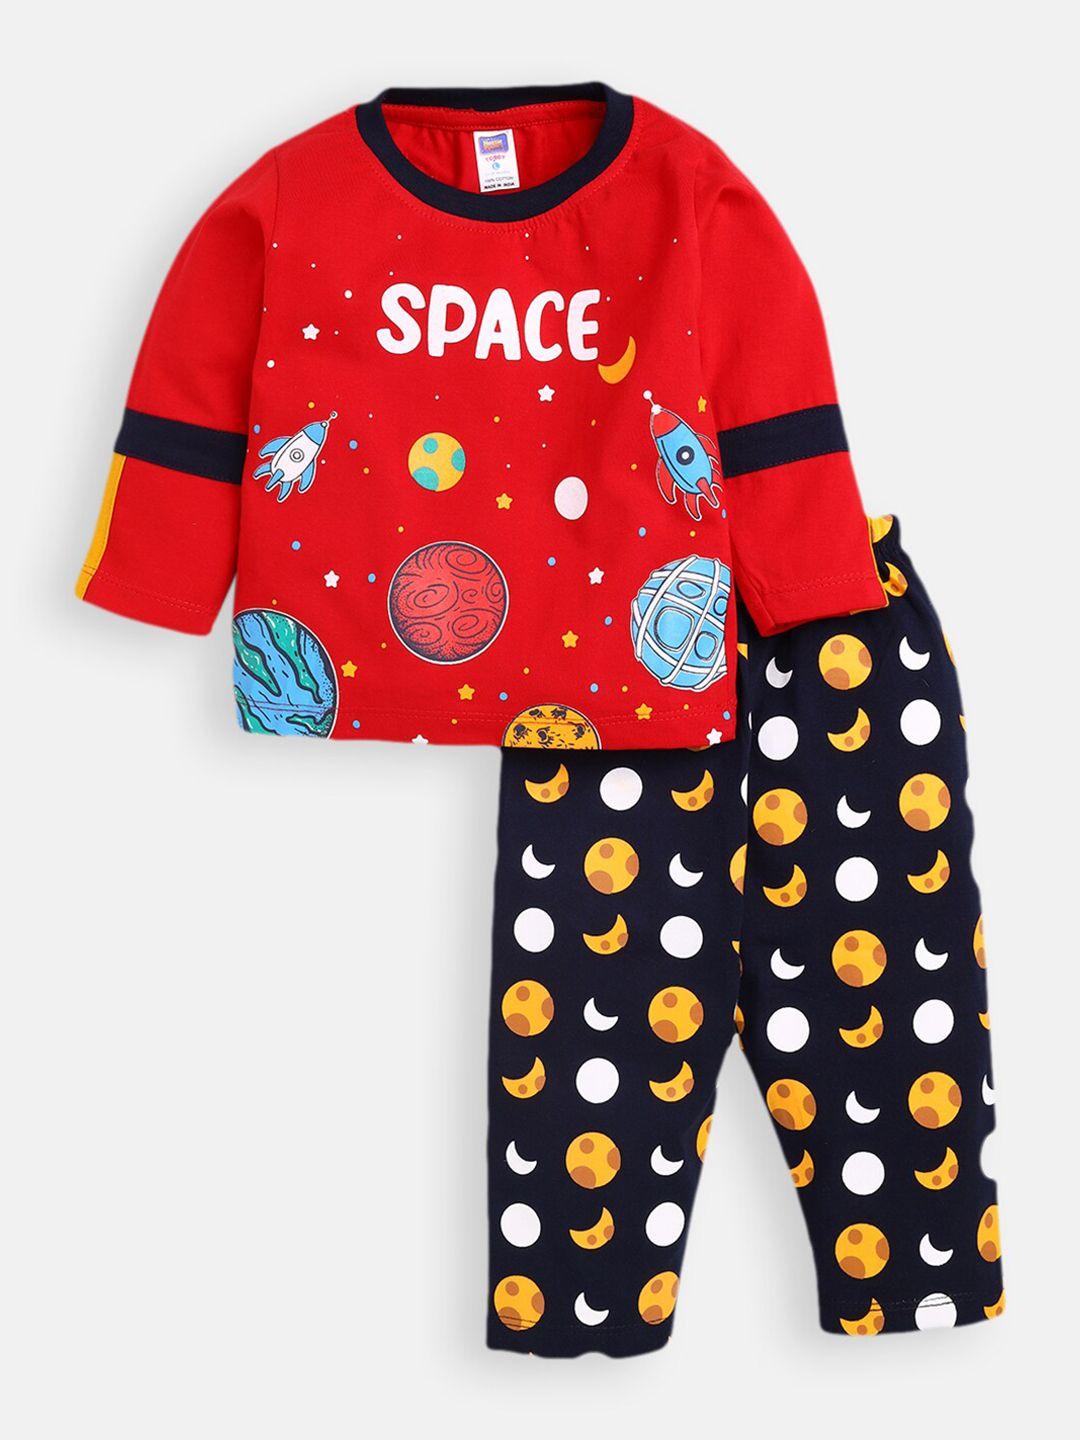 nottie-planet-boys-red-&-black-space-printed-cotton-clothing-set